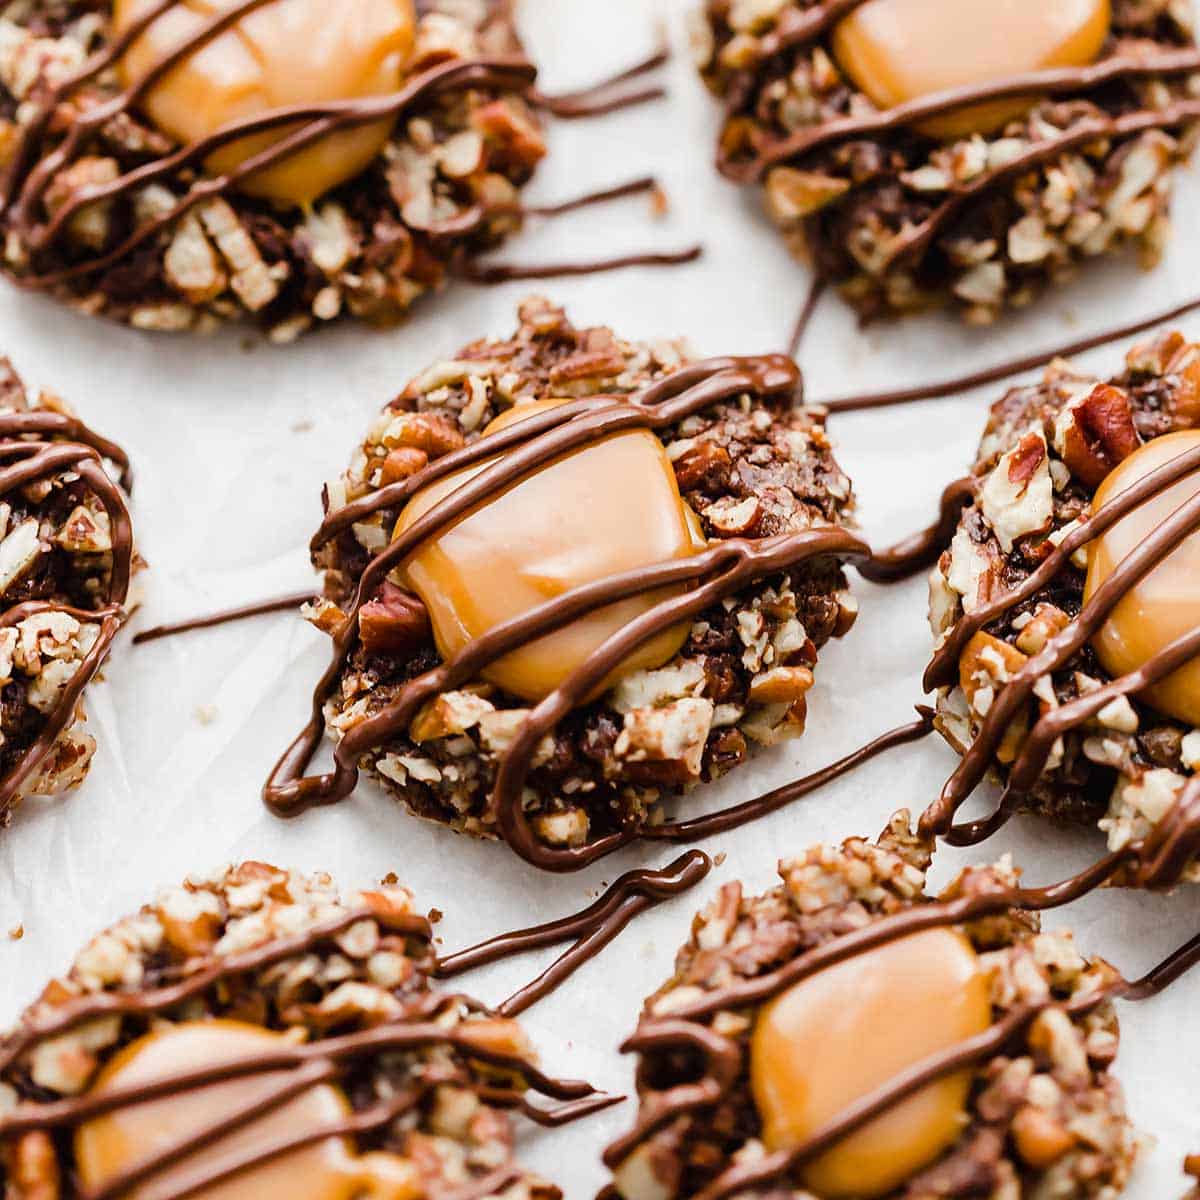 Turtle Cookies drizzled with melted chocolate.